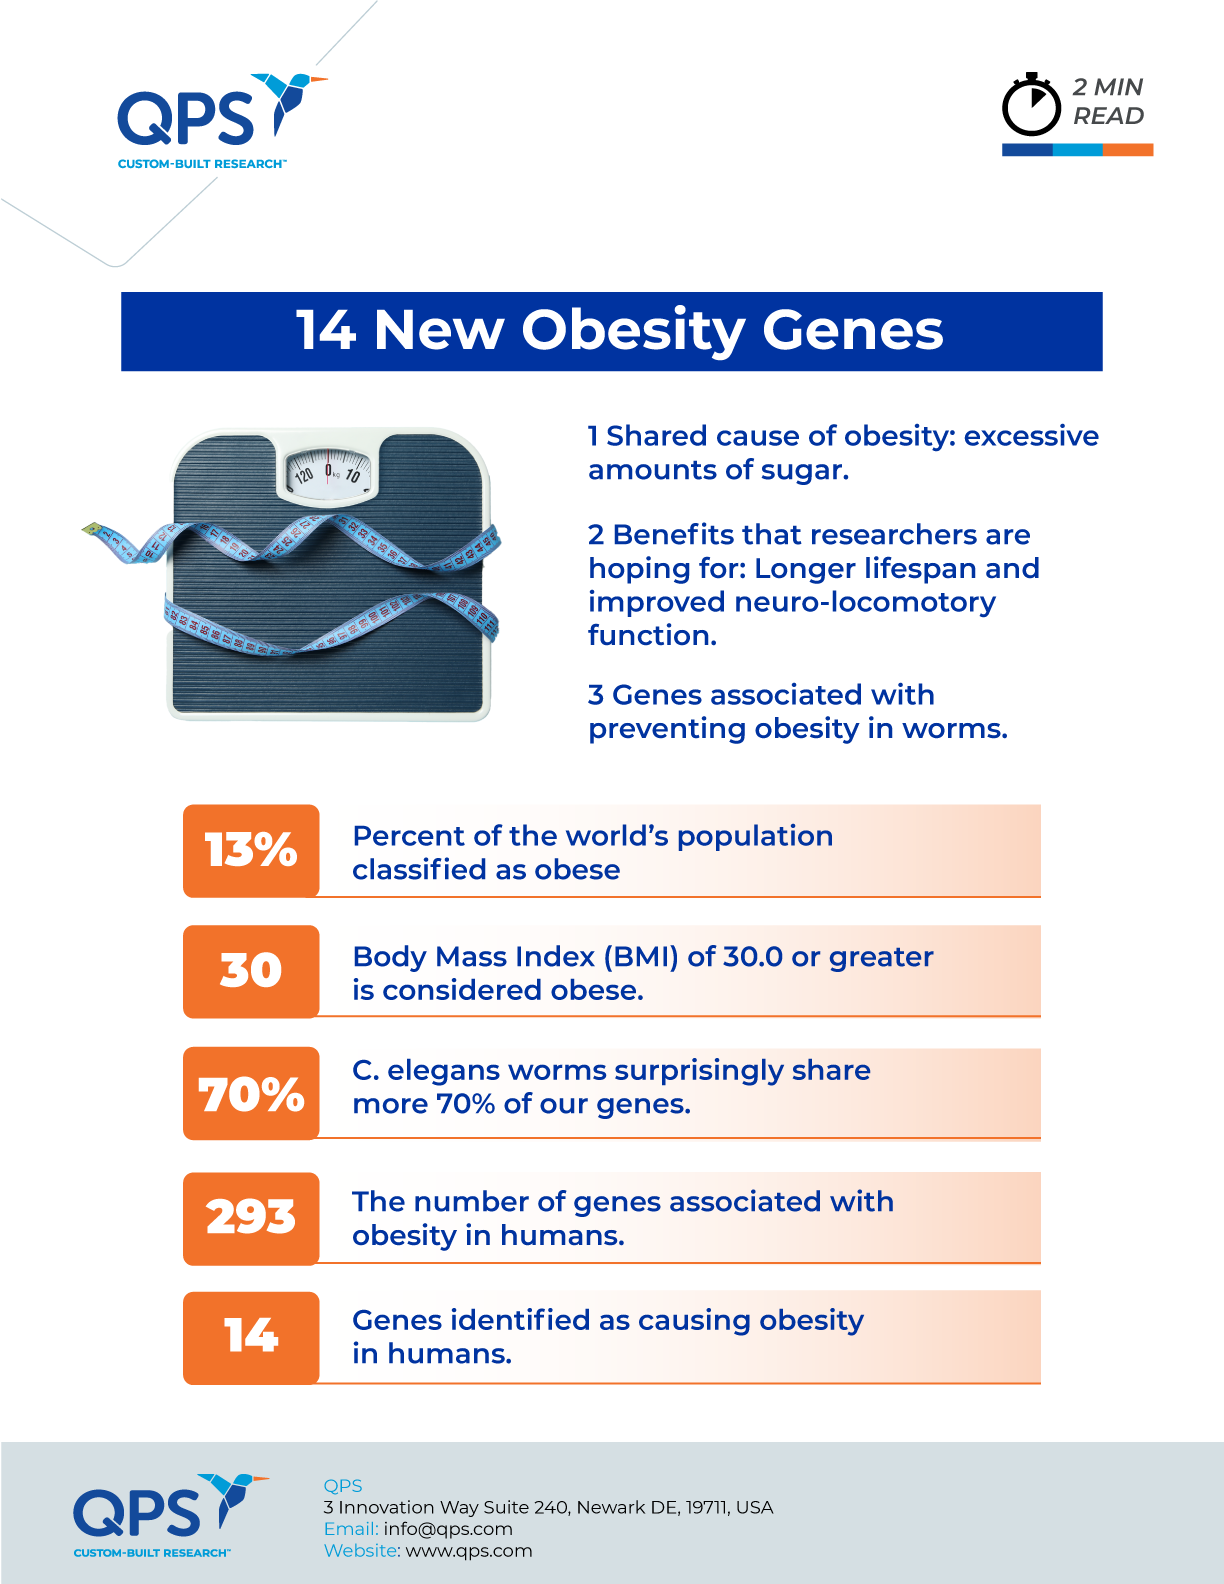 14 New Obesity Genes Discovered